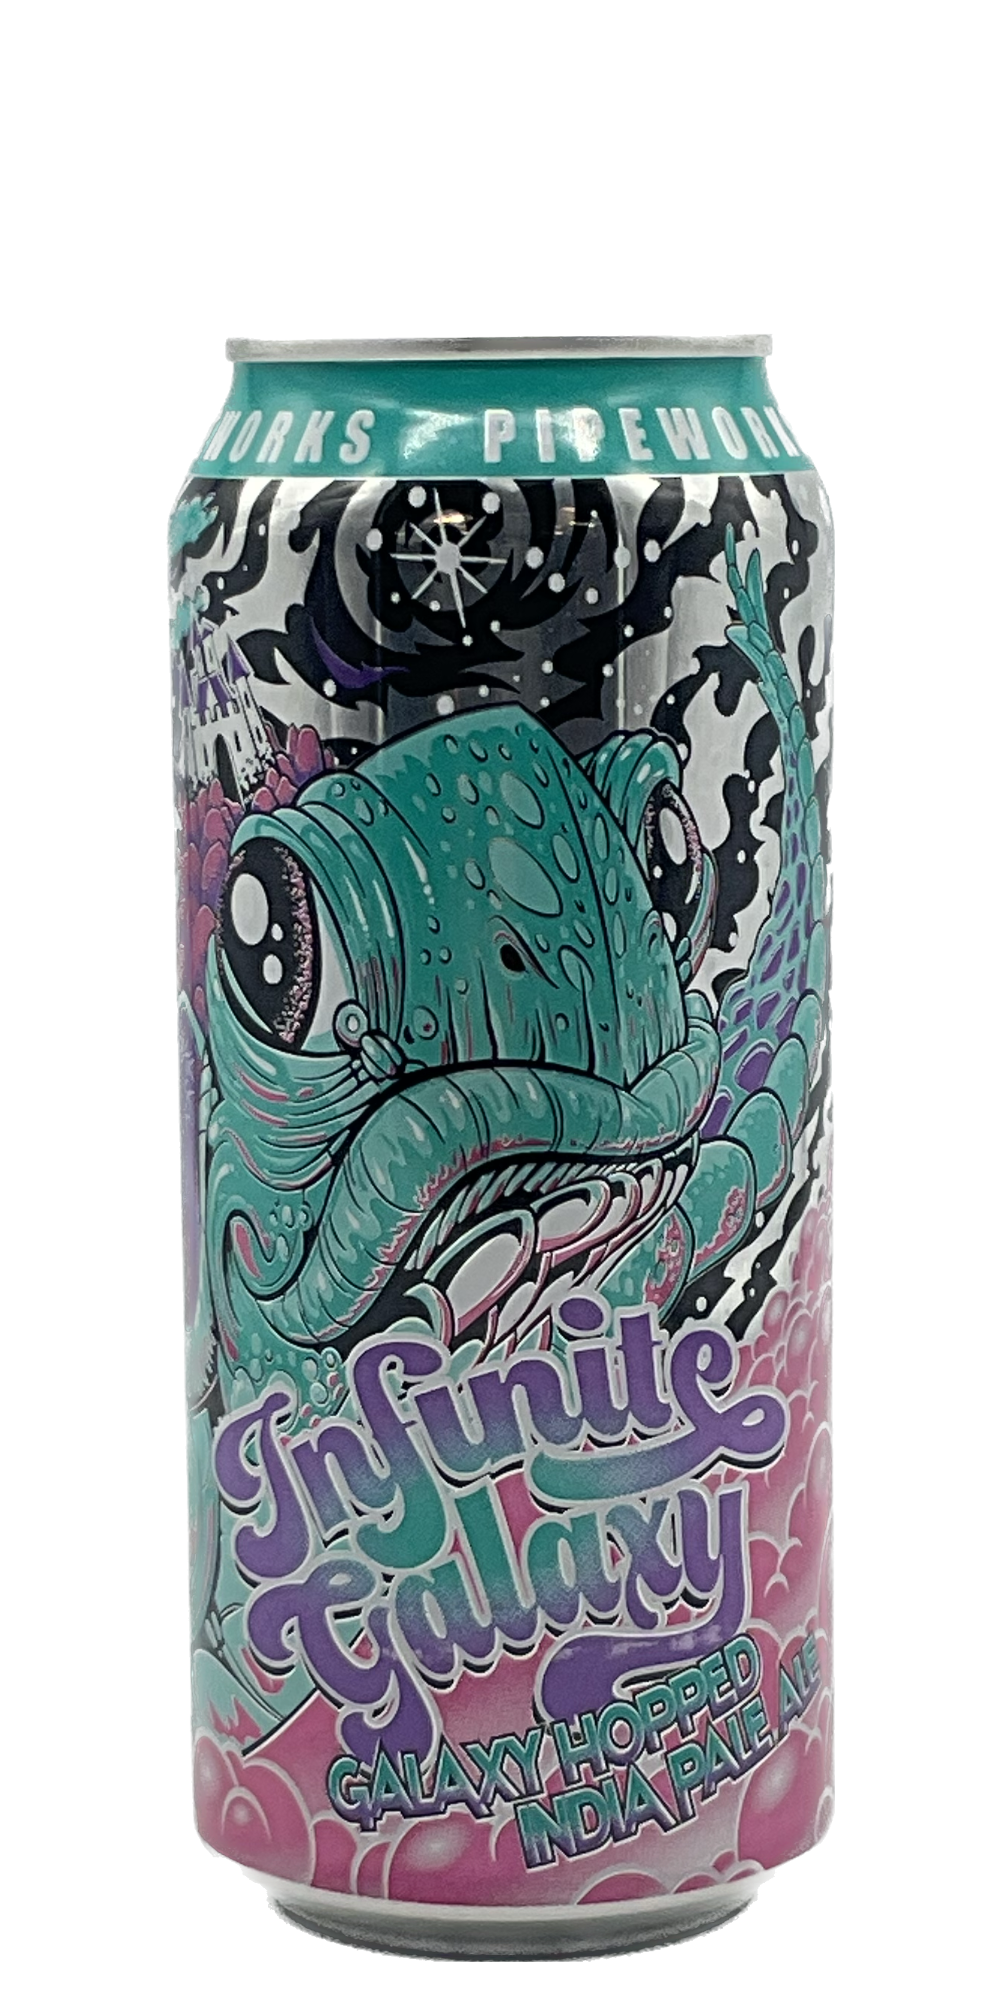 Pipeworks - Infinite Galaxy